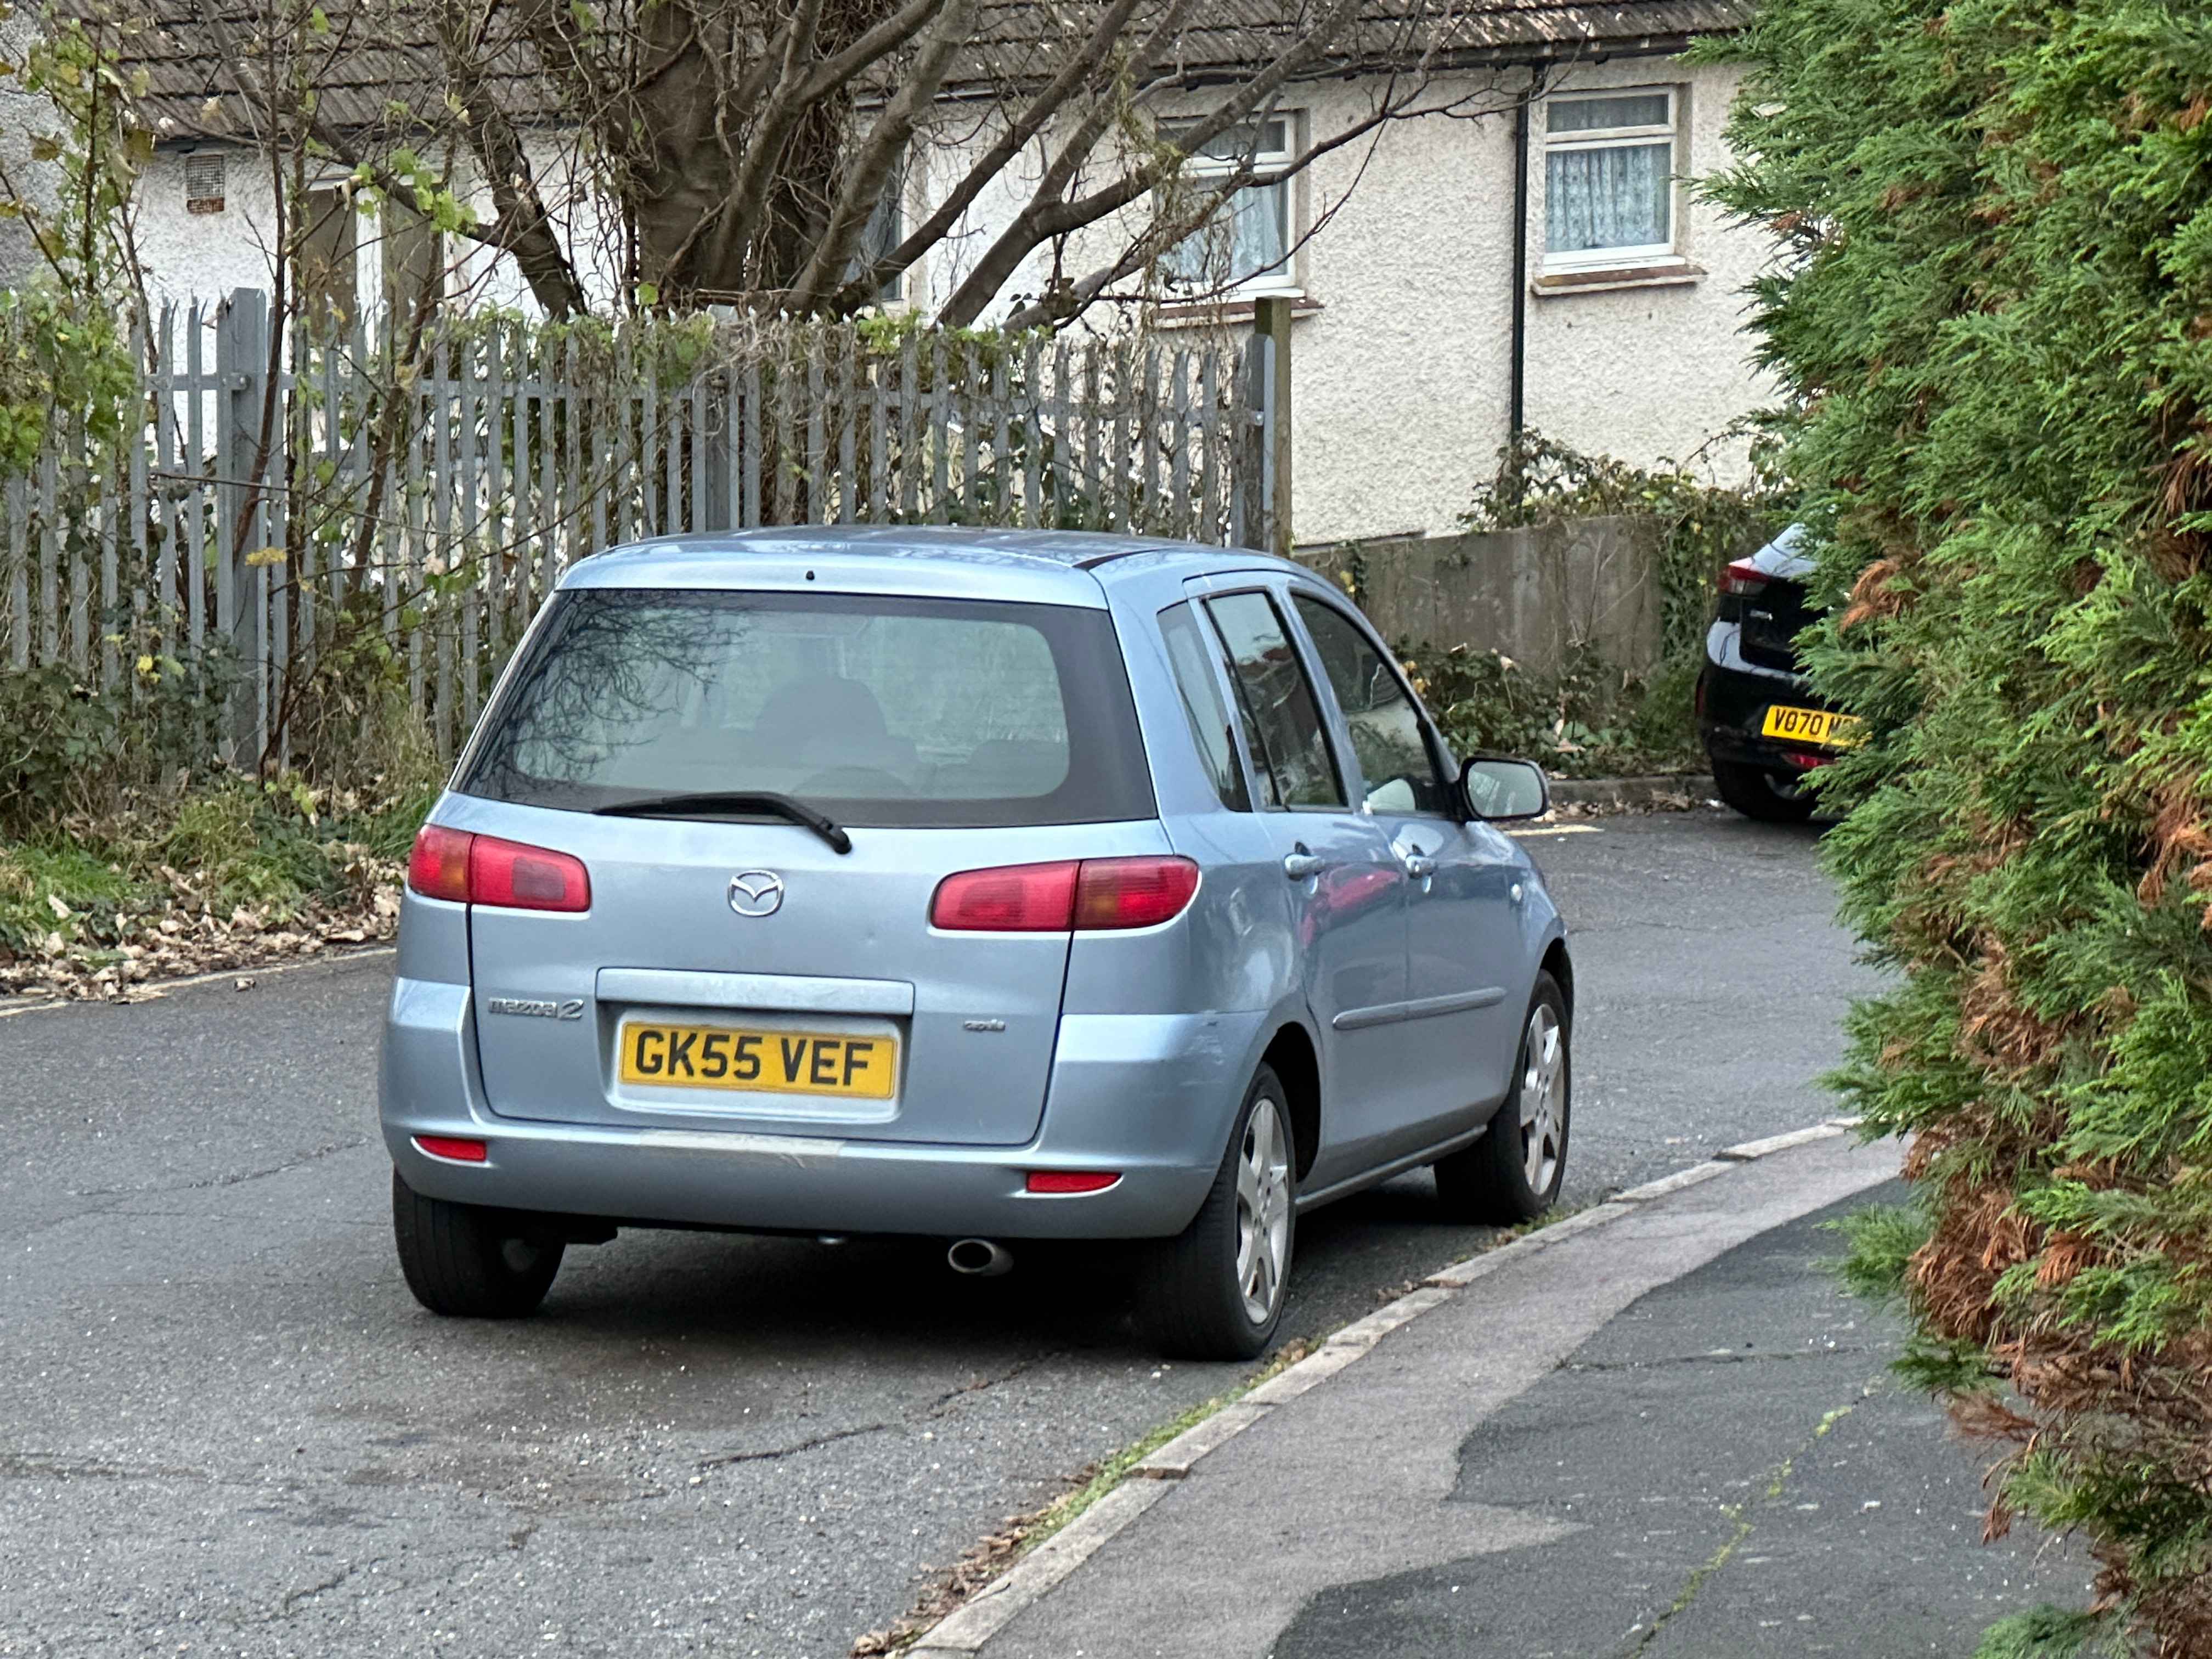 Photograph of GK55 VEF - a Silver Mazda 2 parked in Hollingdean by a non-resident. The fourth of nine photographs supplied by the residents of Hollingdean.